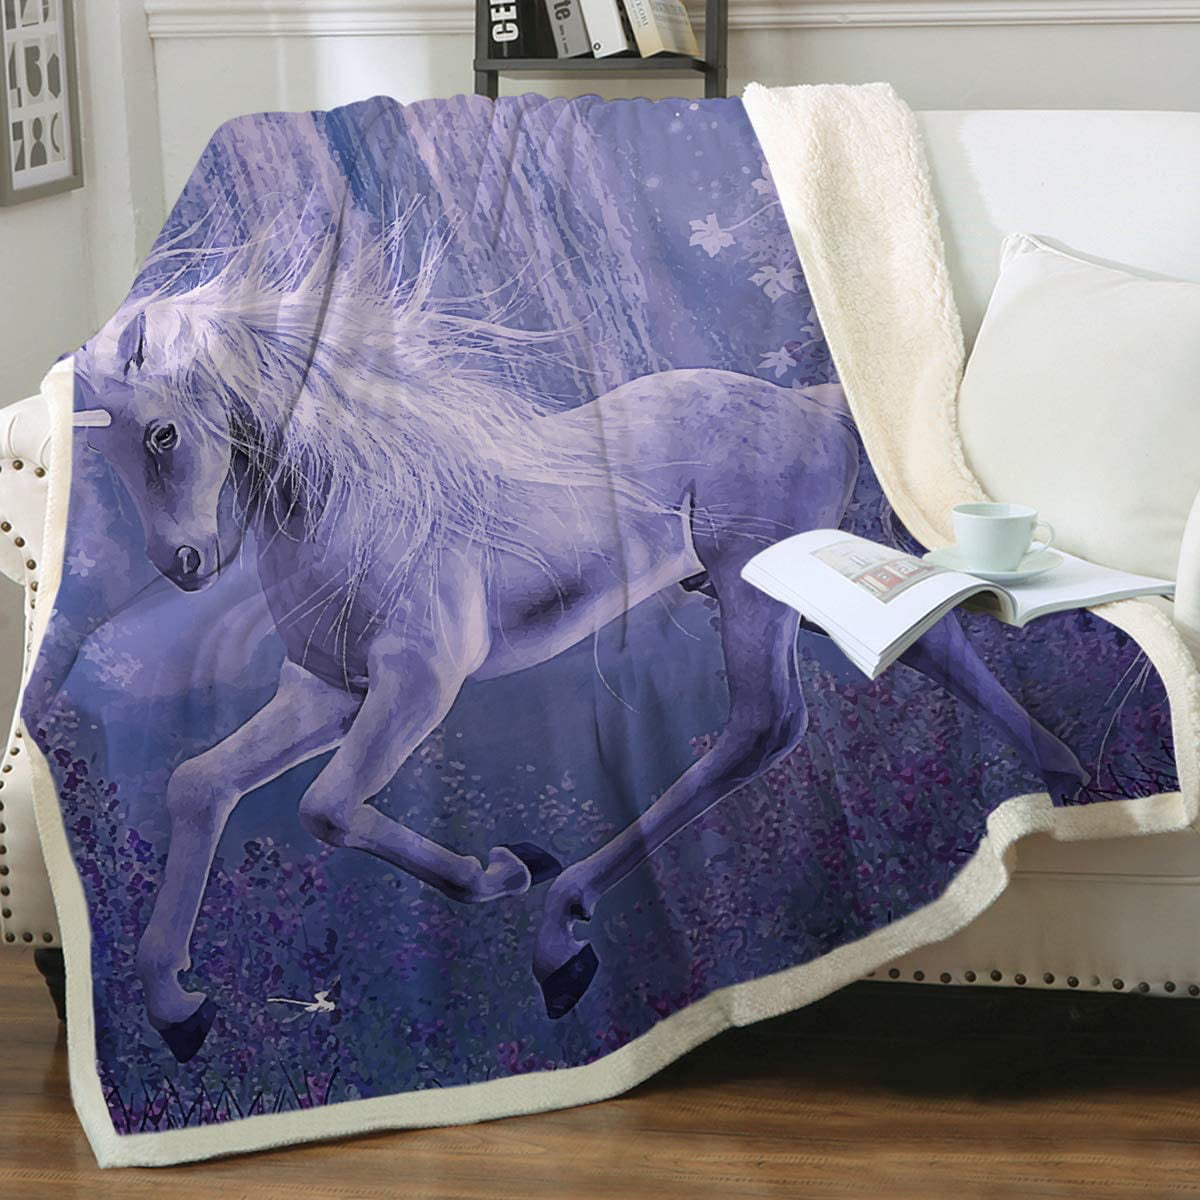 UNICORN EYES FLANNEL BLANKET WITH SHERPA VERY SOFTY AND WARM 2 PCS TWIN SIZE 